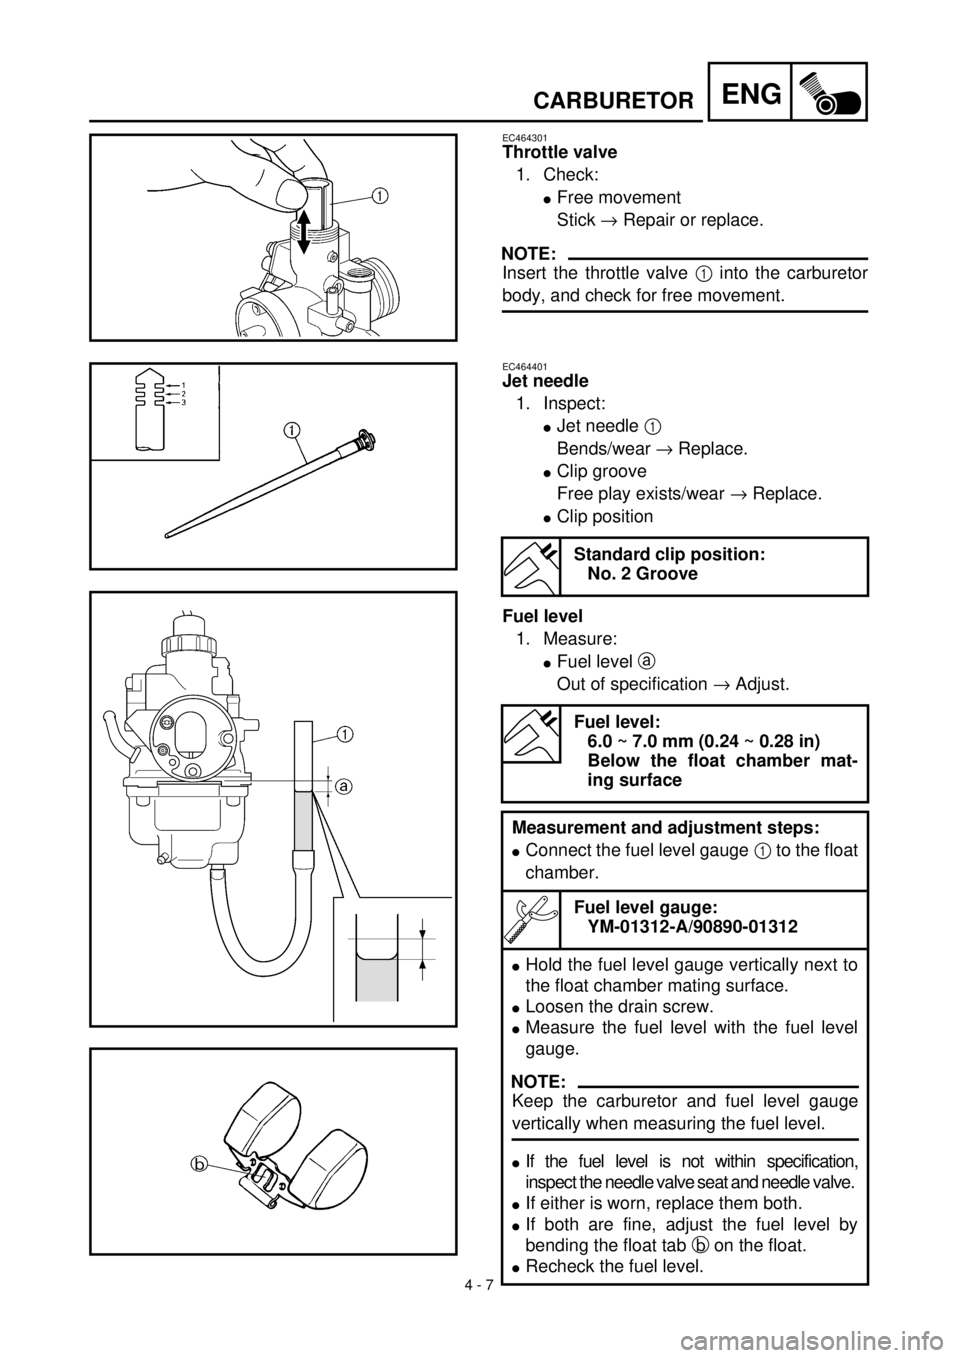 YAMAHA TTR125 2000  Notices Demploi (in French) 4 - 7
ENGCARBURETOR
EC464301
Throttle valve 
1. Check:
lFree movement
Stick ® Repair or replace.
NOTE:
Insert the throttle valve 1 into the carburetor
body, and check for free movement.
EC464401
Jet 